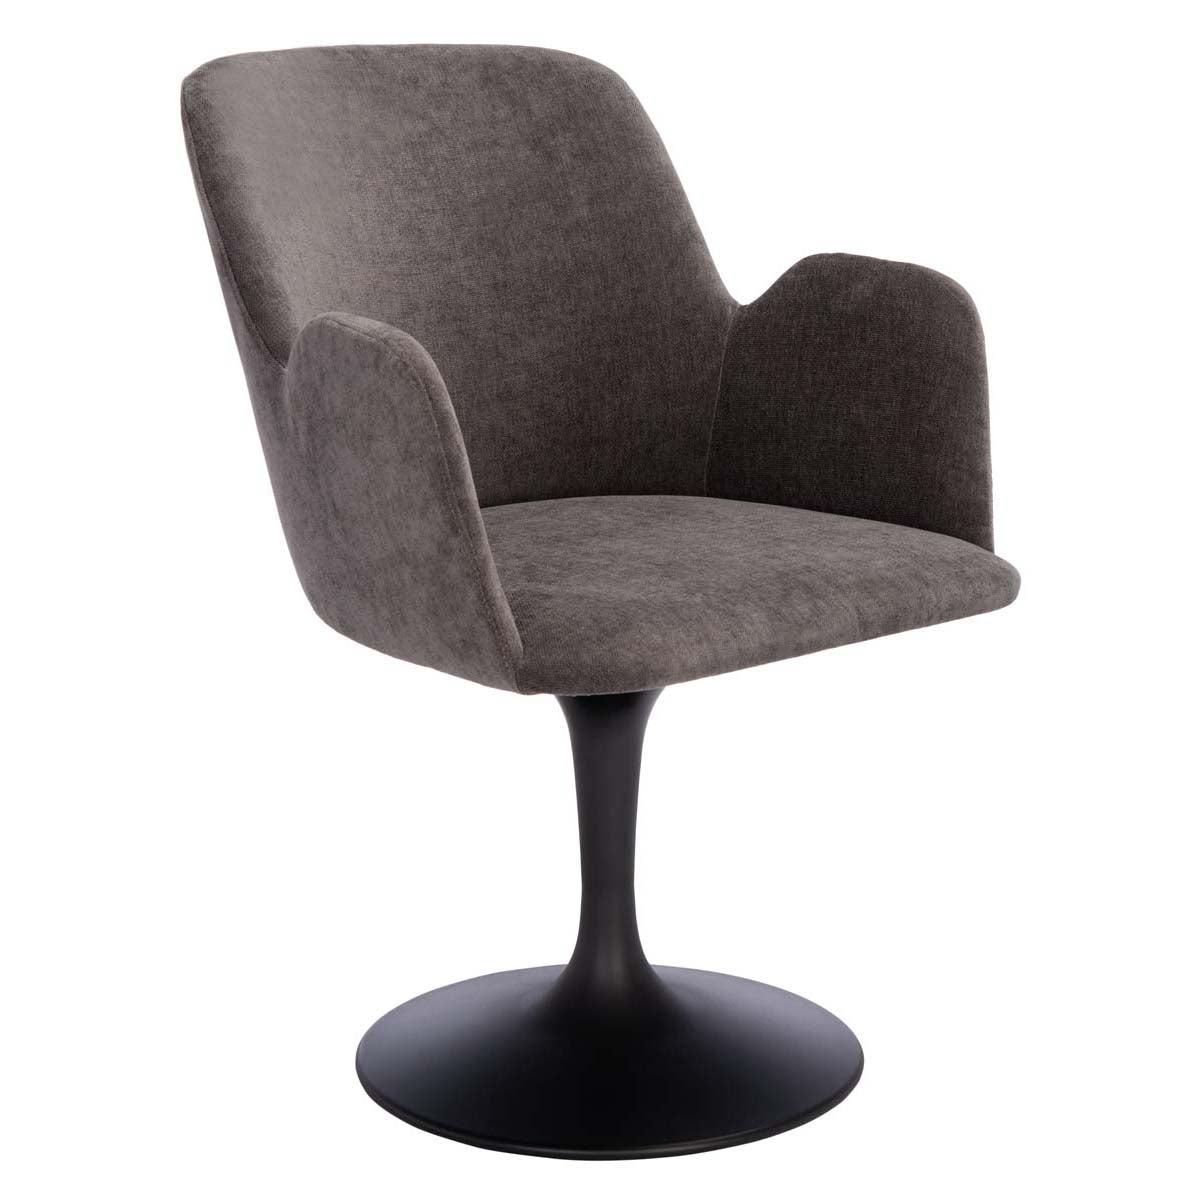 Safavieh Couture Cherith Pedastal Dining Chair - Anthracite / Black